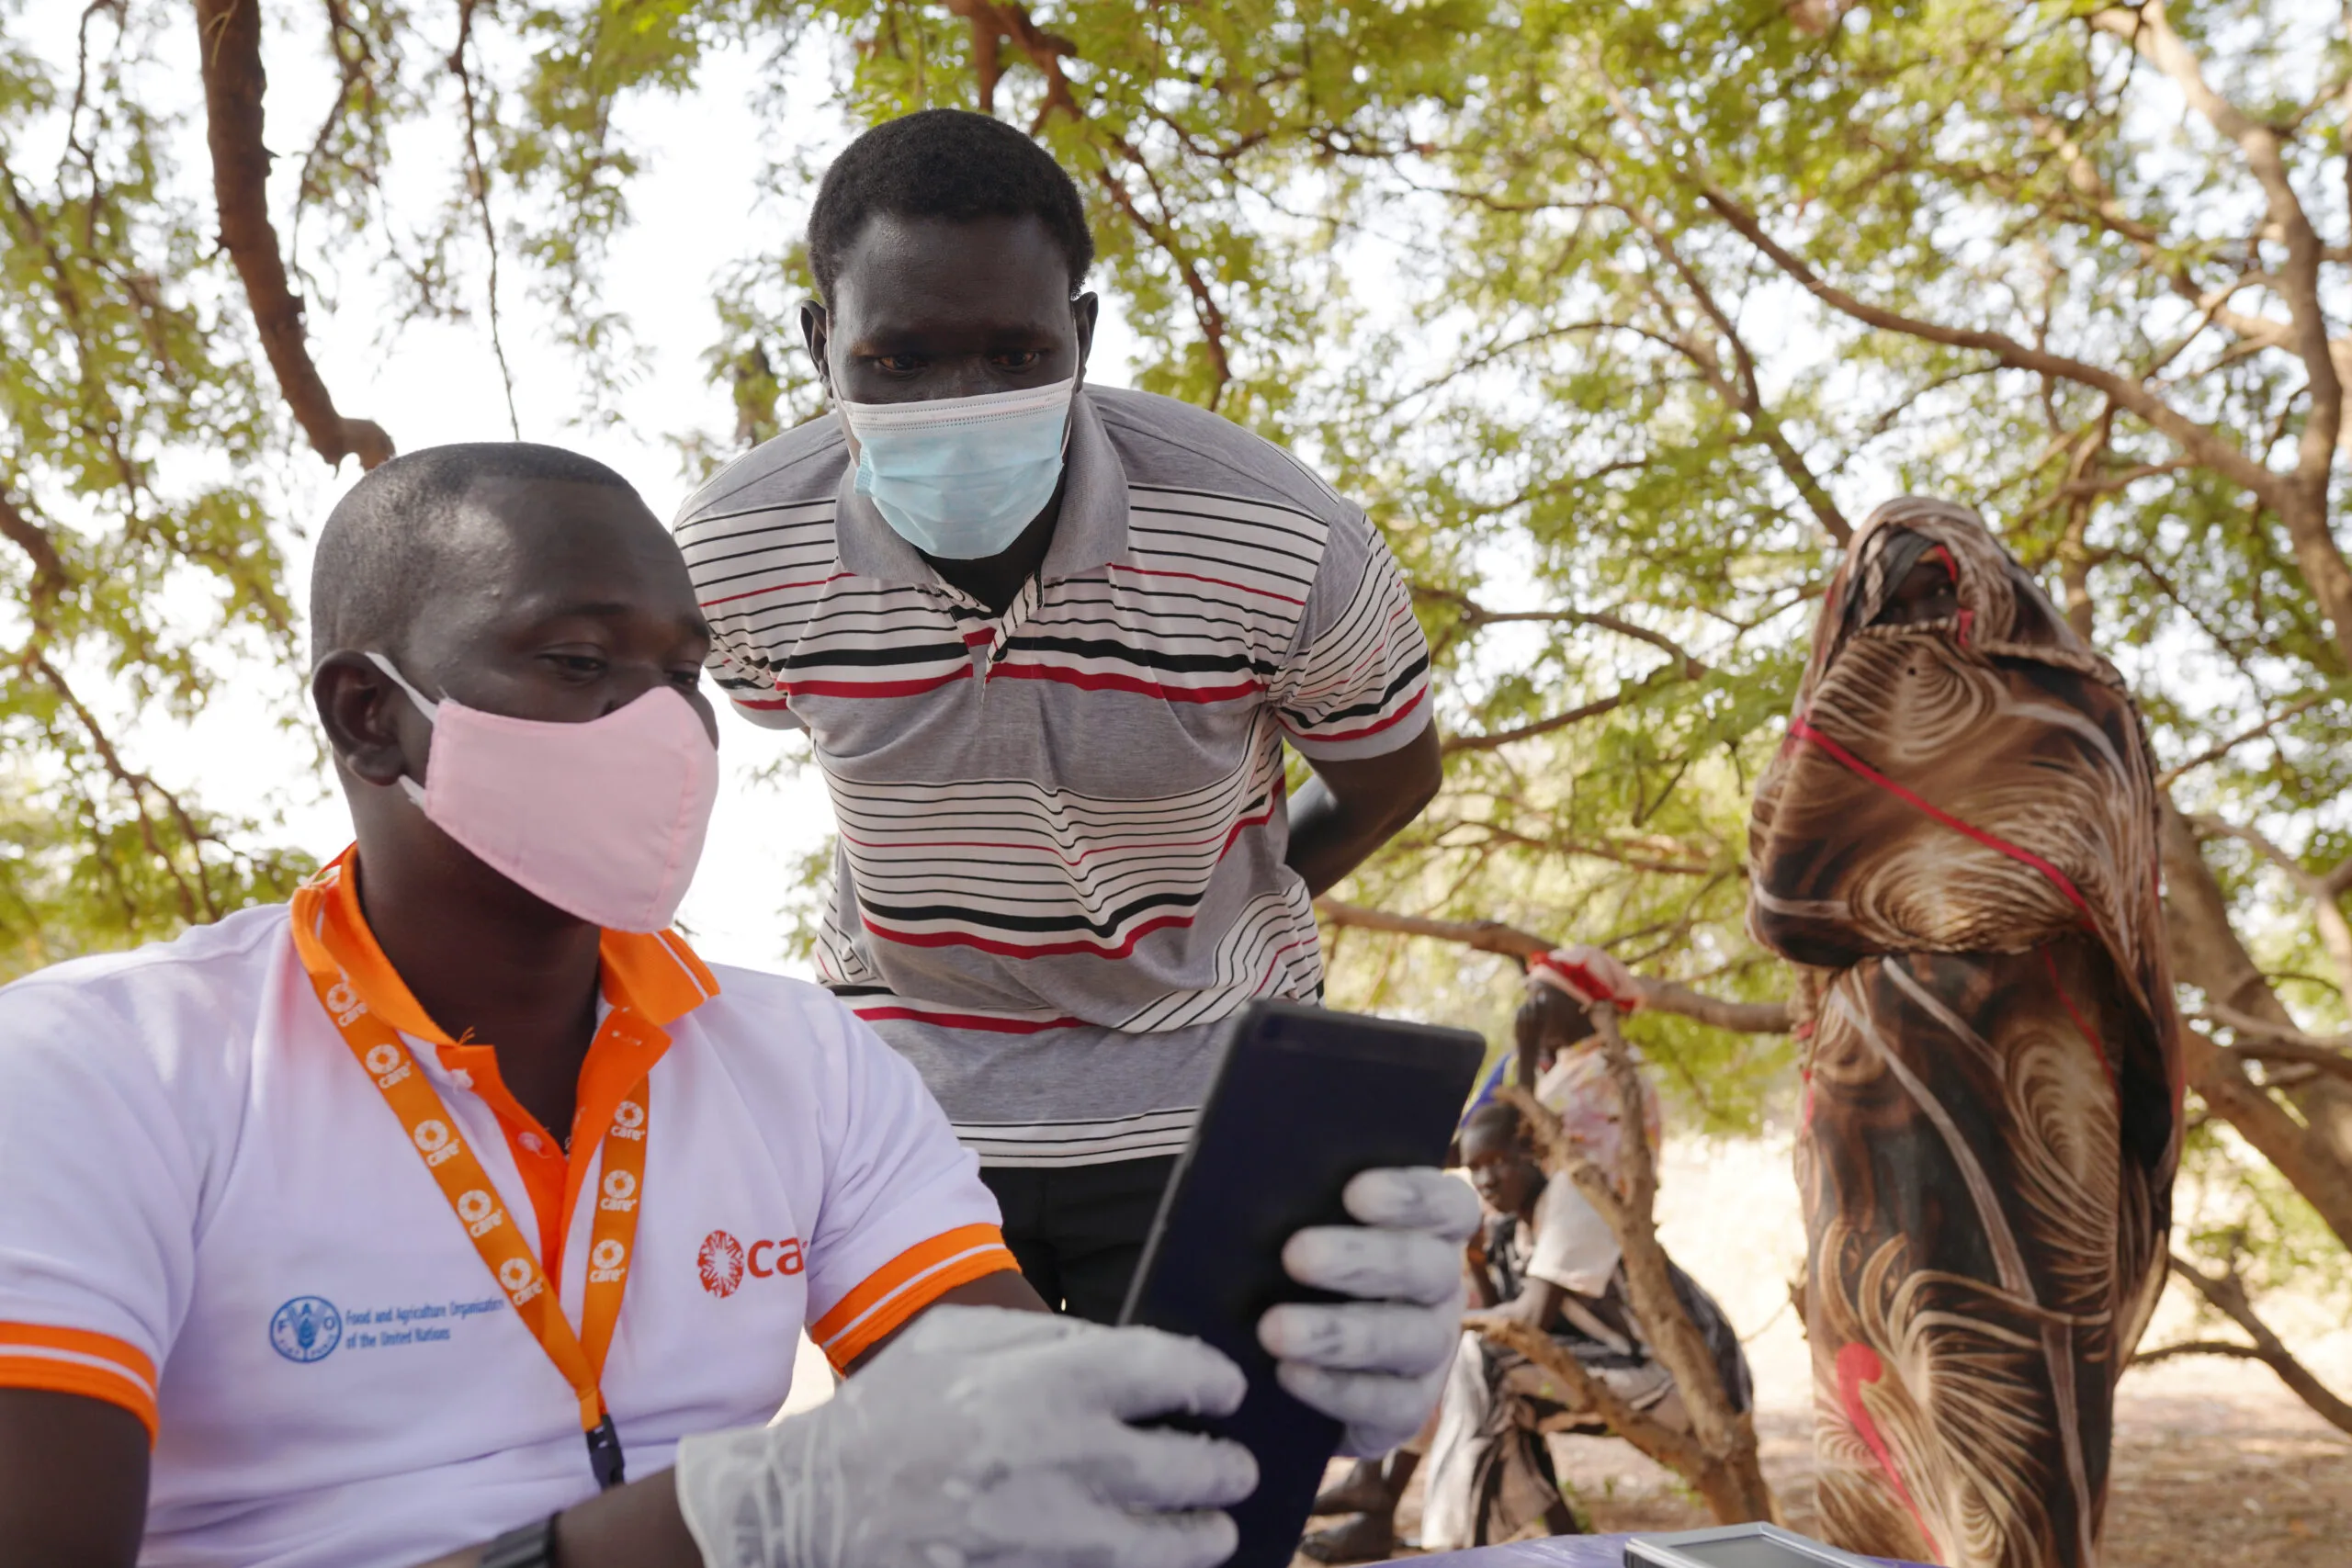 Registering for seeds and tools distribution in South Sudan.